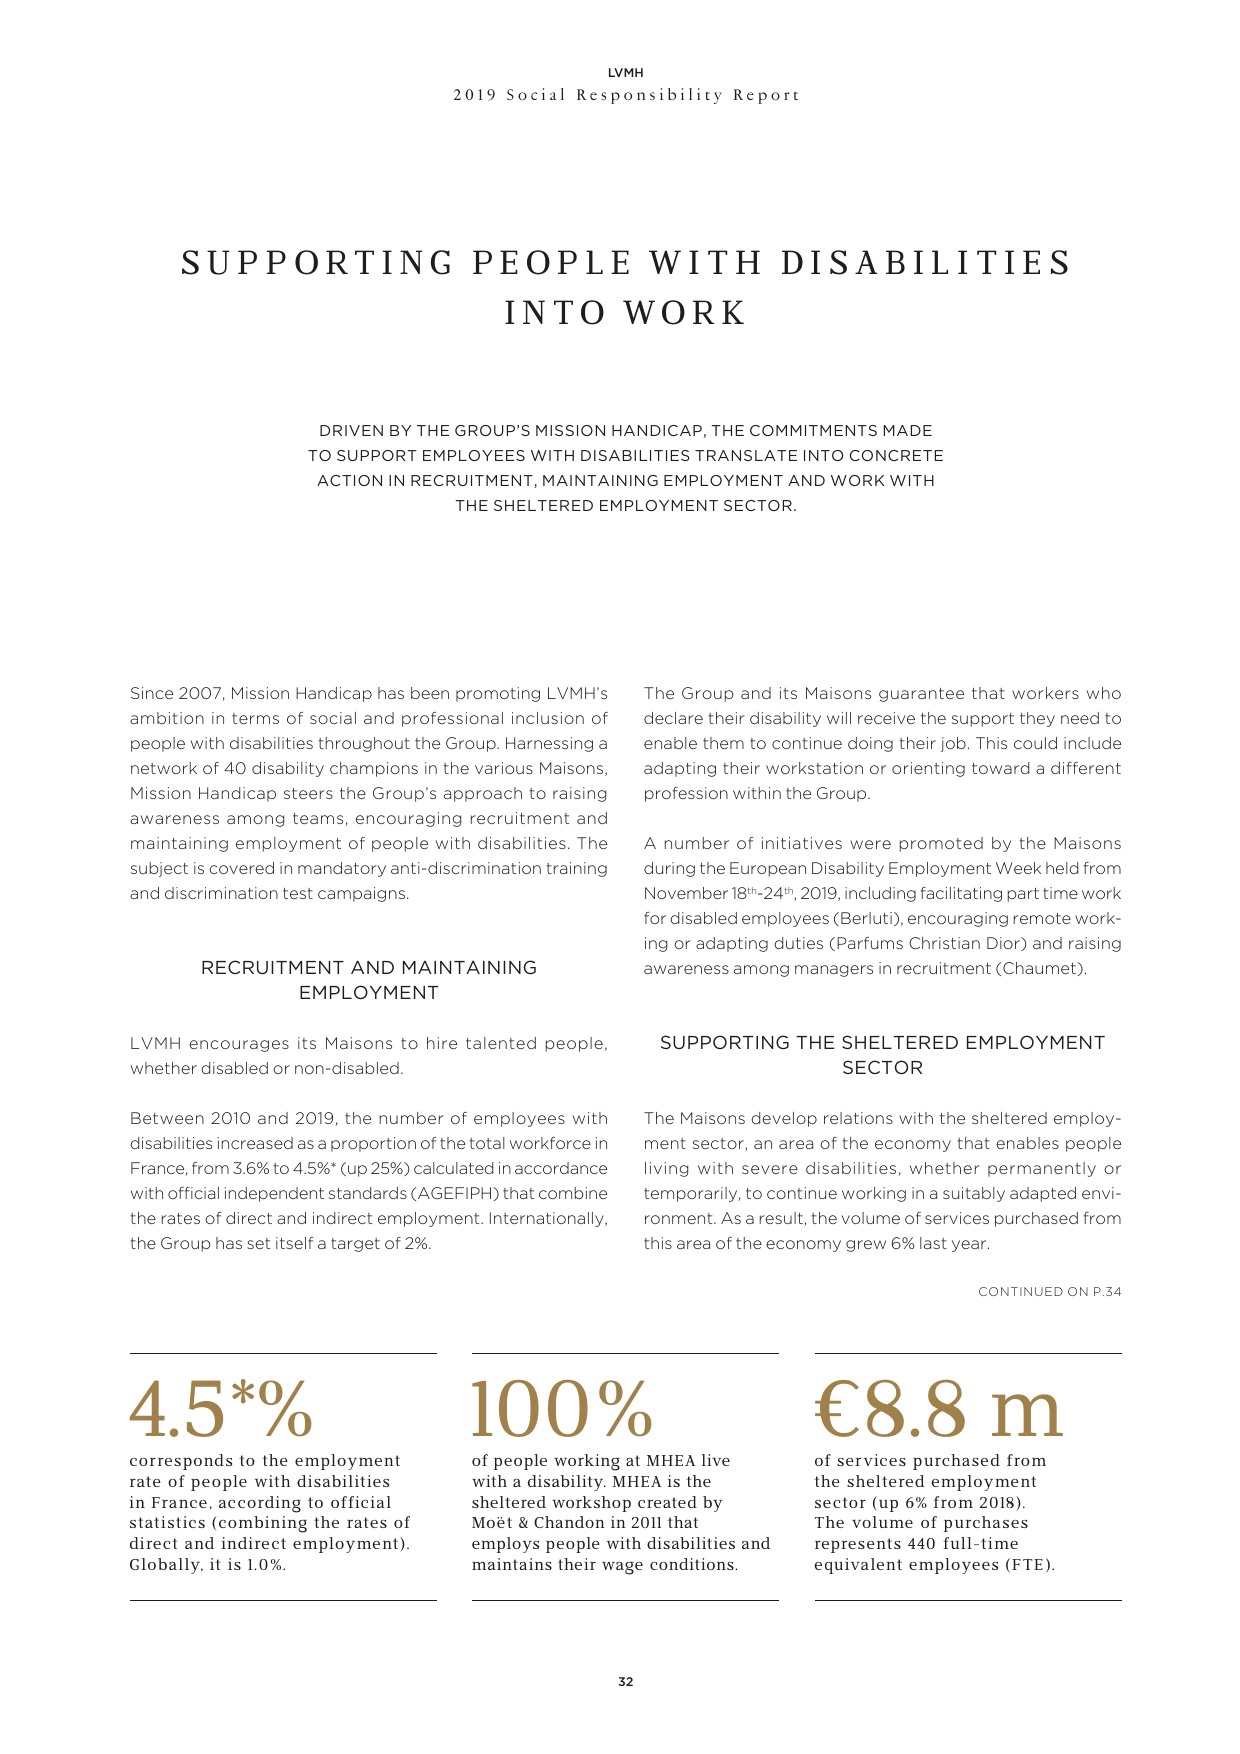 LVMH supports inclusion of people with disabilities - LVMH